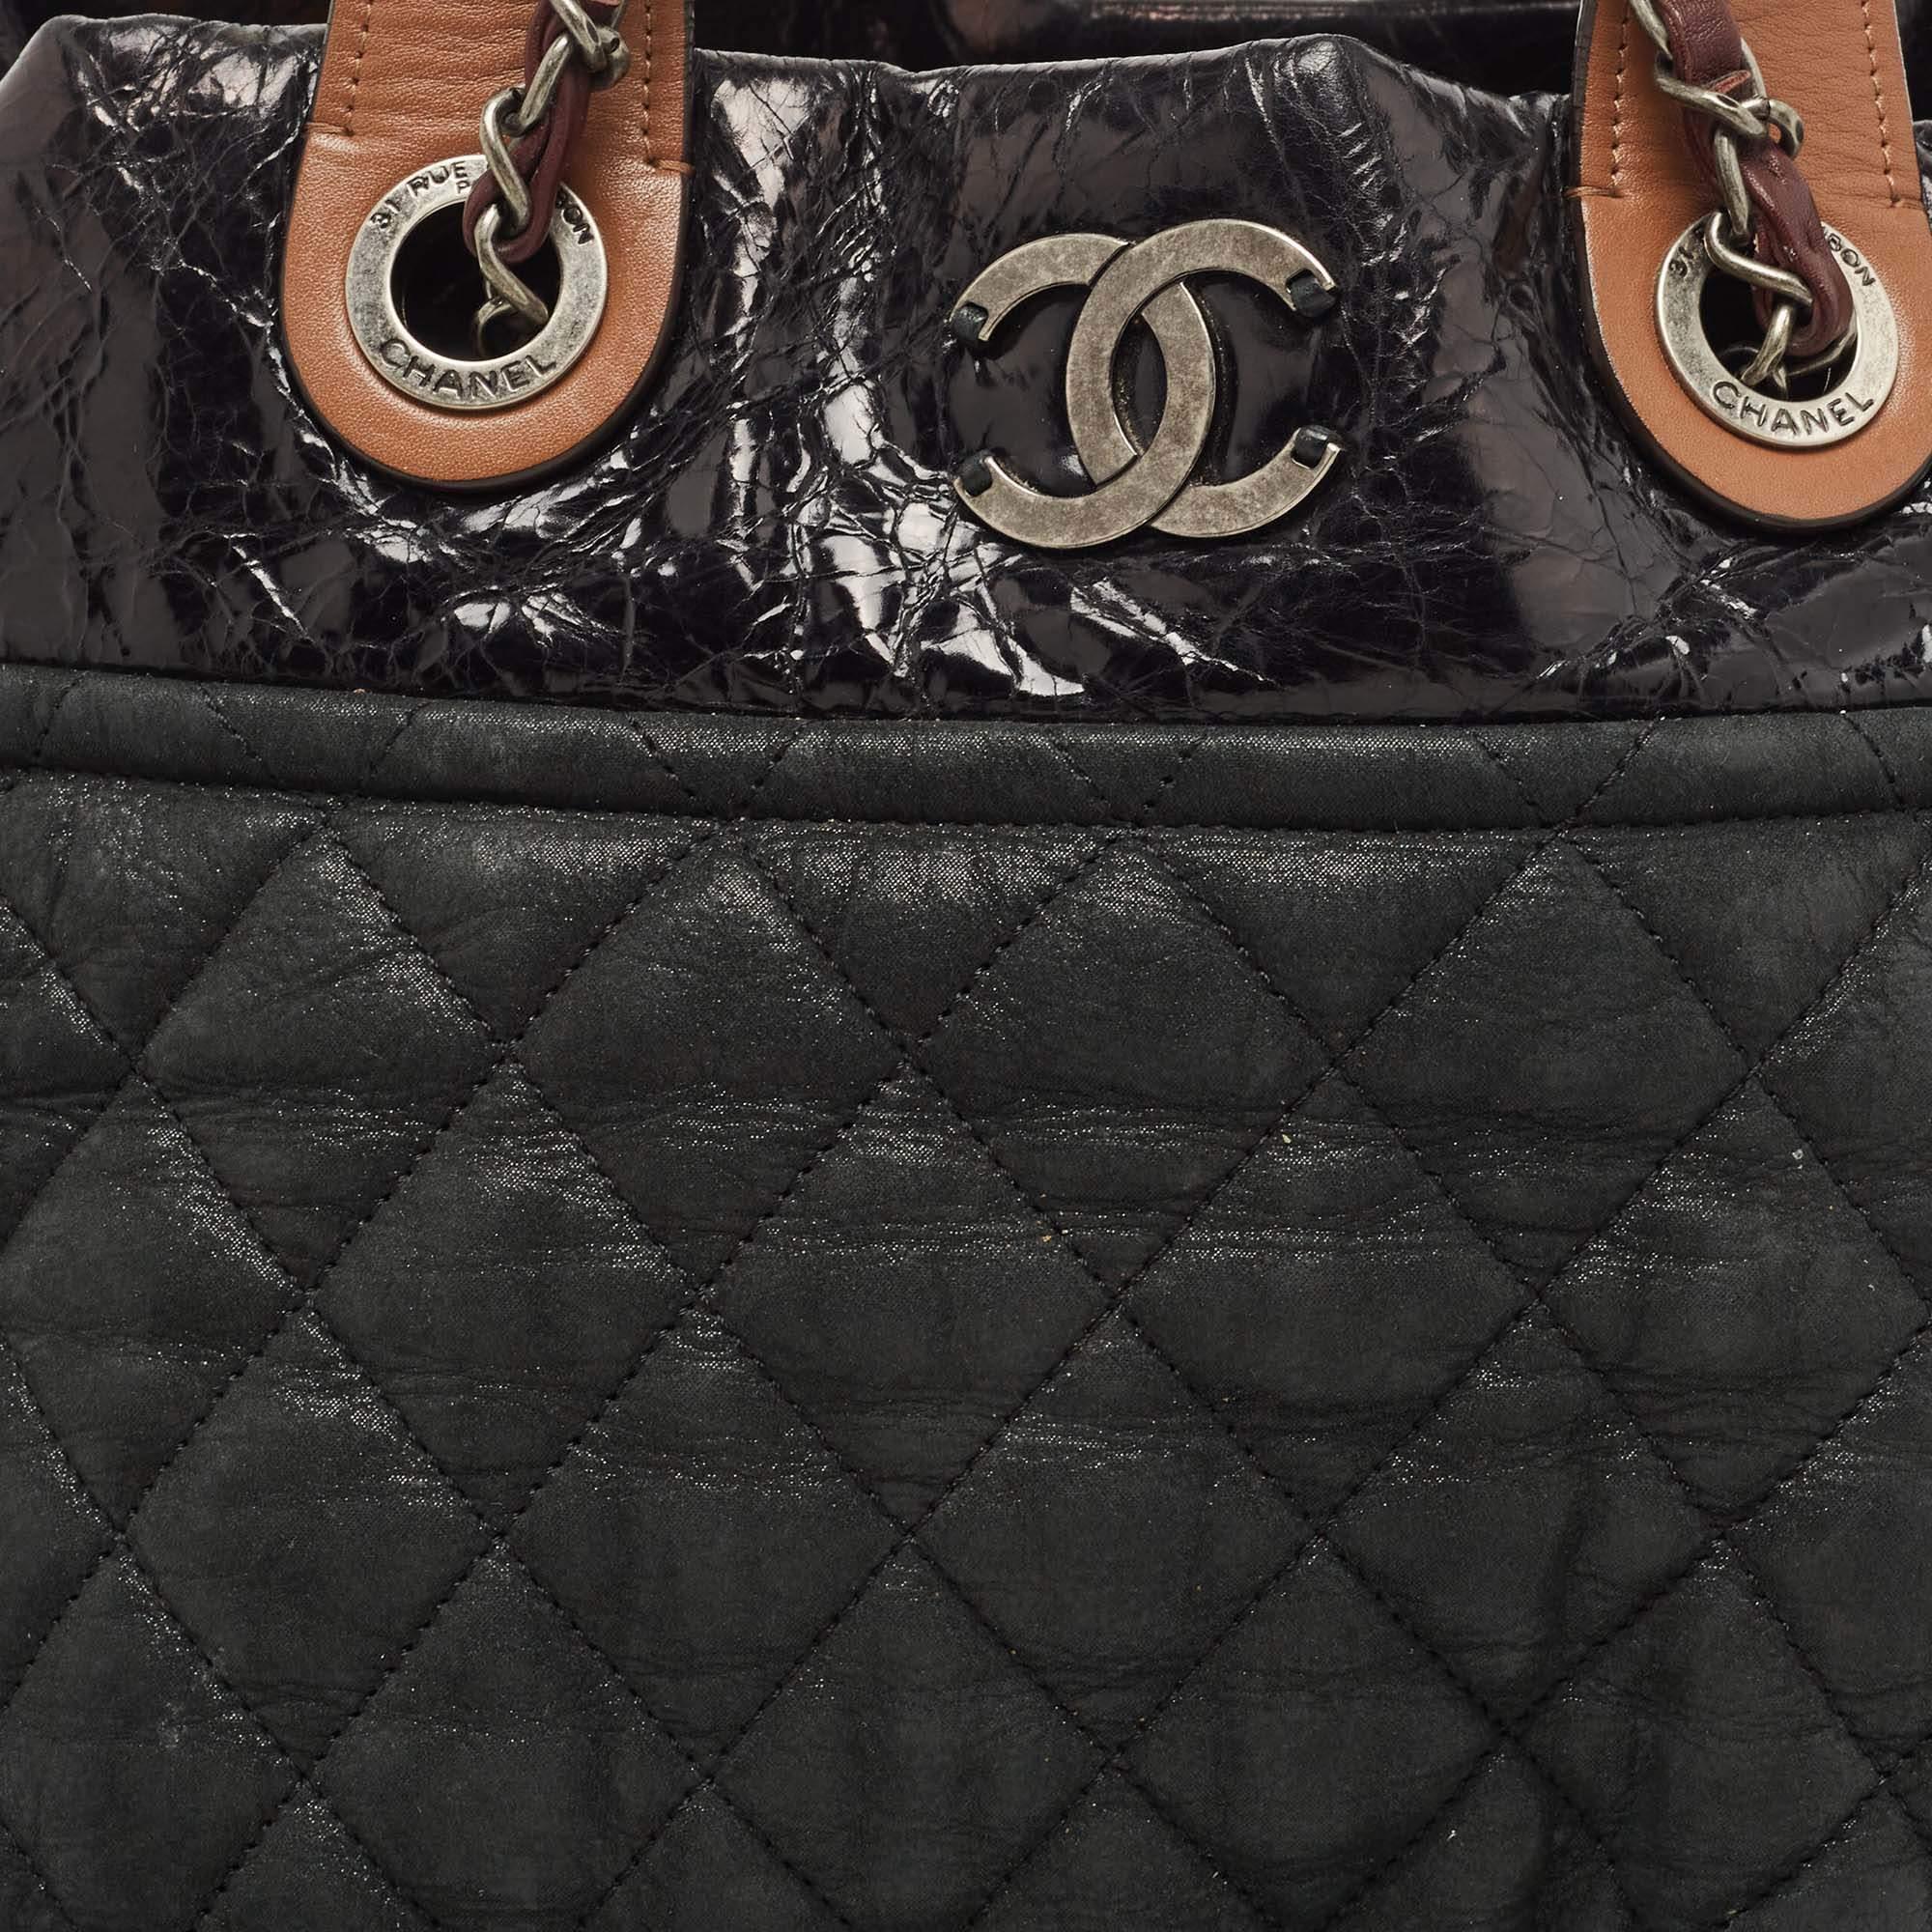 Chanel Black/Burgundy Quilted Nubuck and Leather In The Mix Bag 5